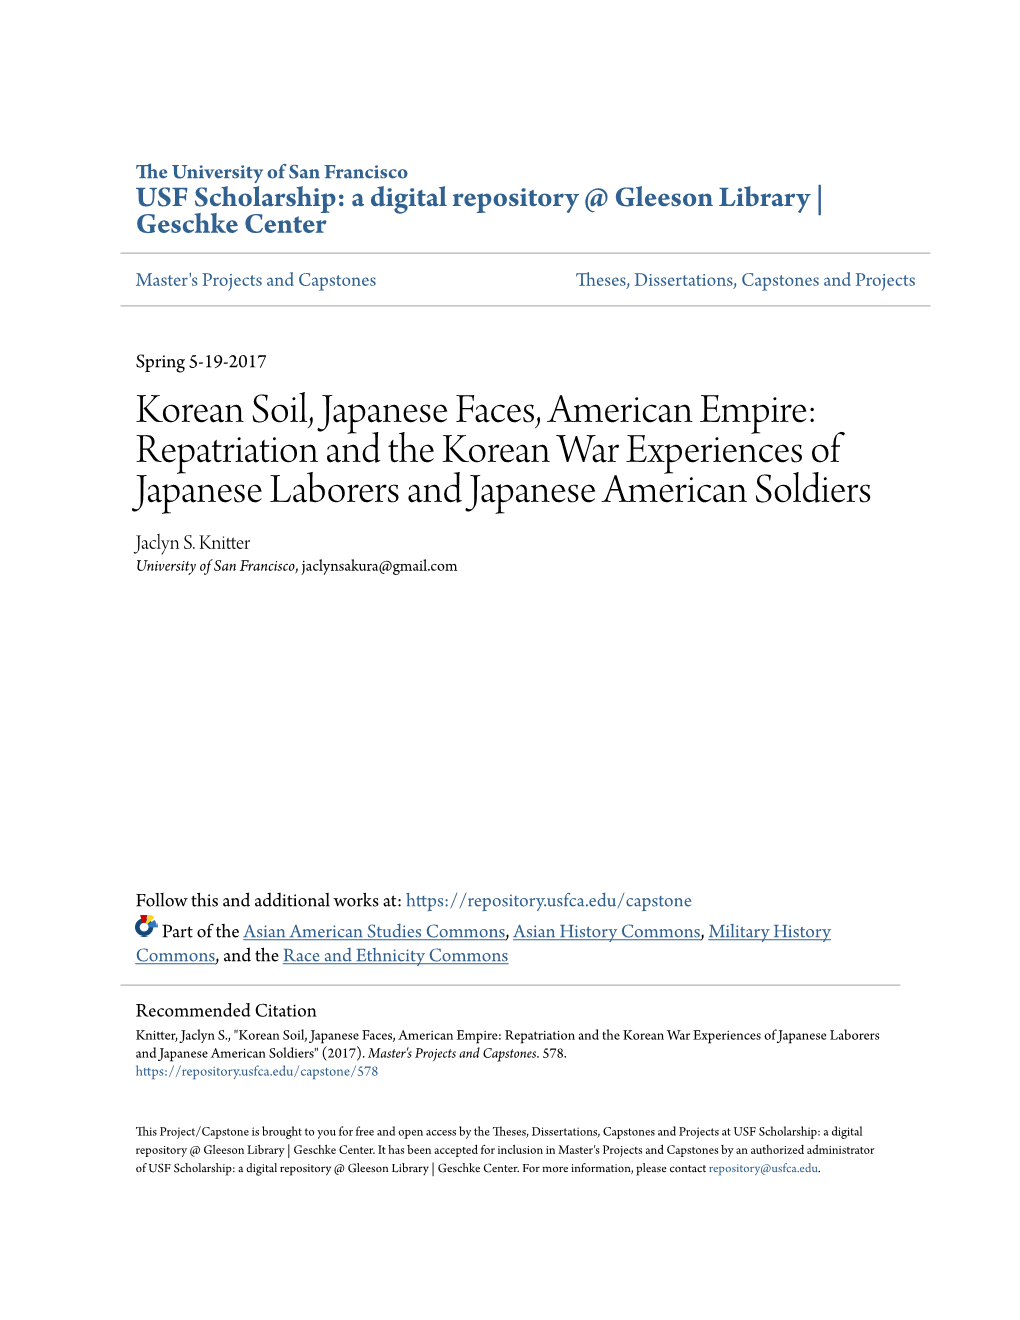 Repatriation and the Korean War Experiences of Japanese Laborers and Japanese American Soldiers Jaclyn S